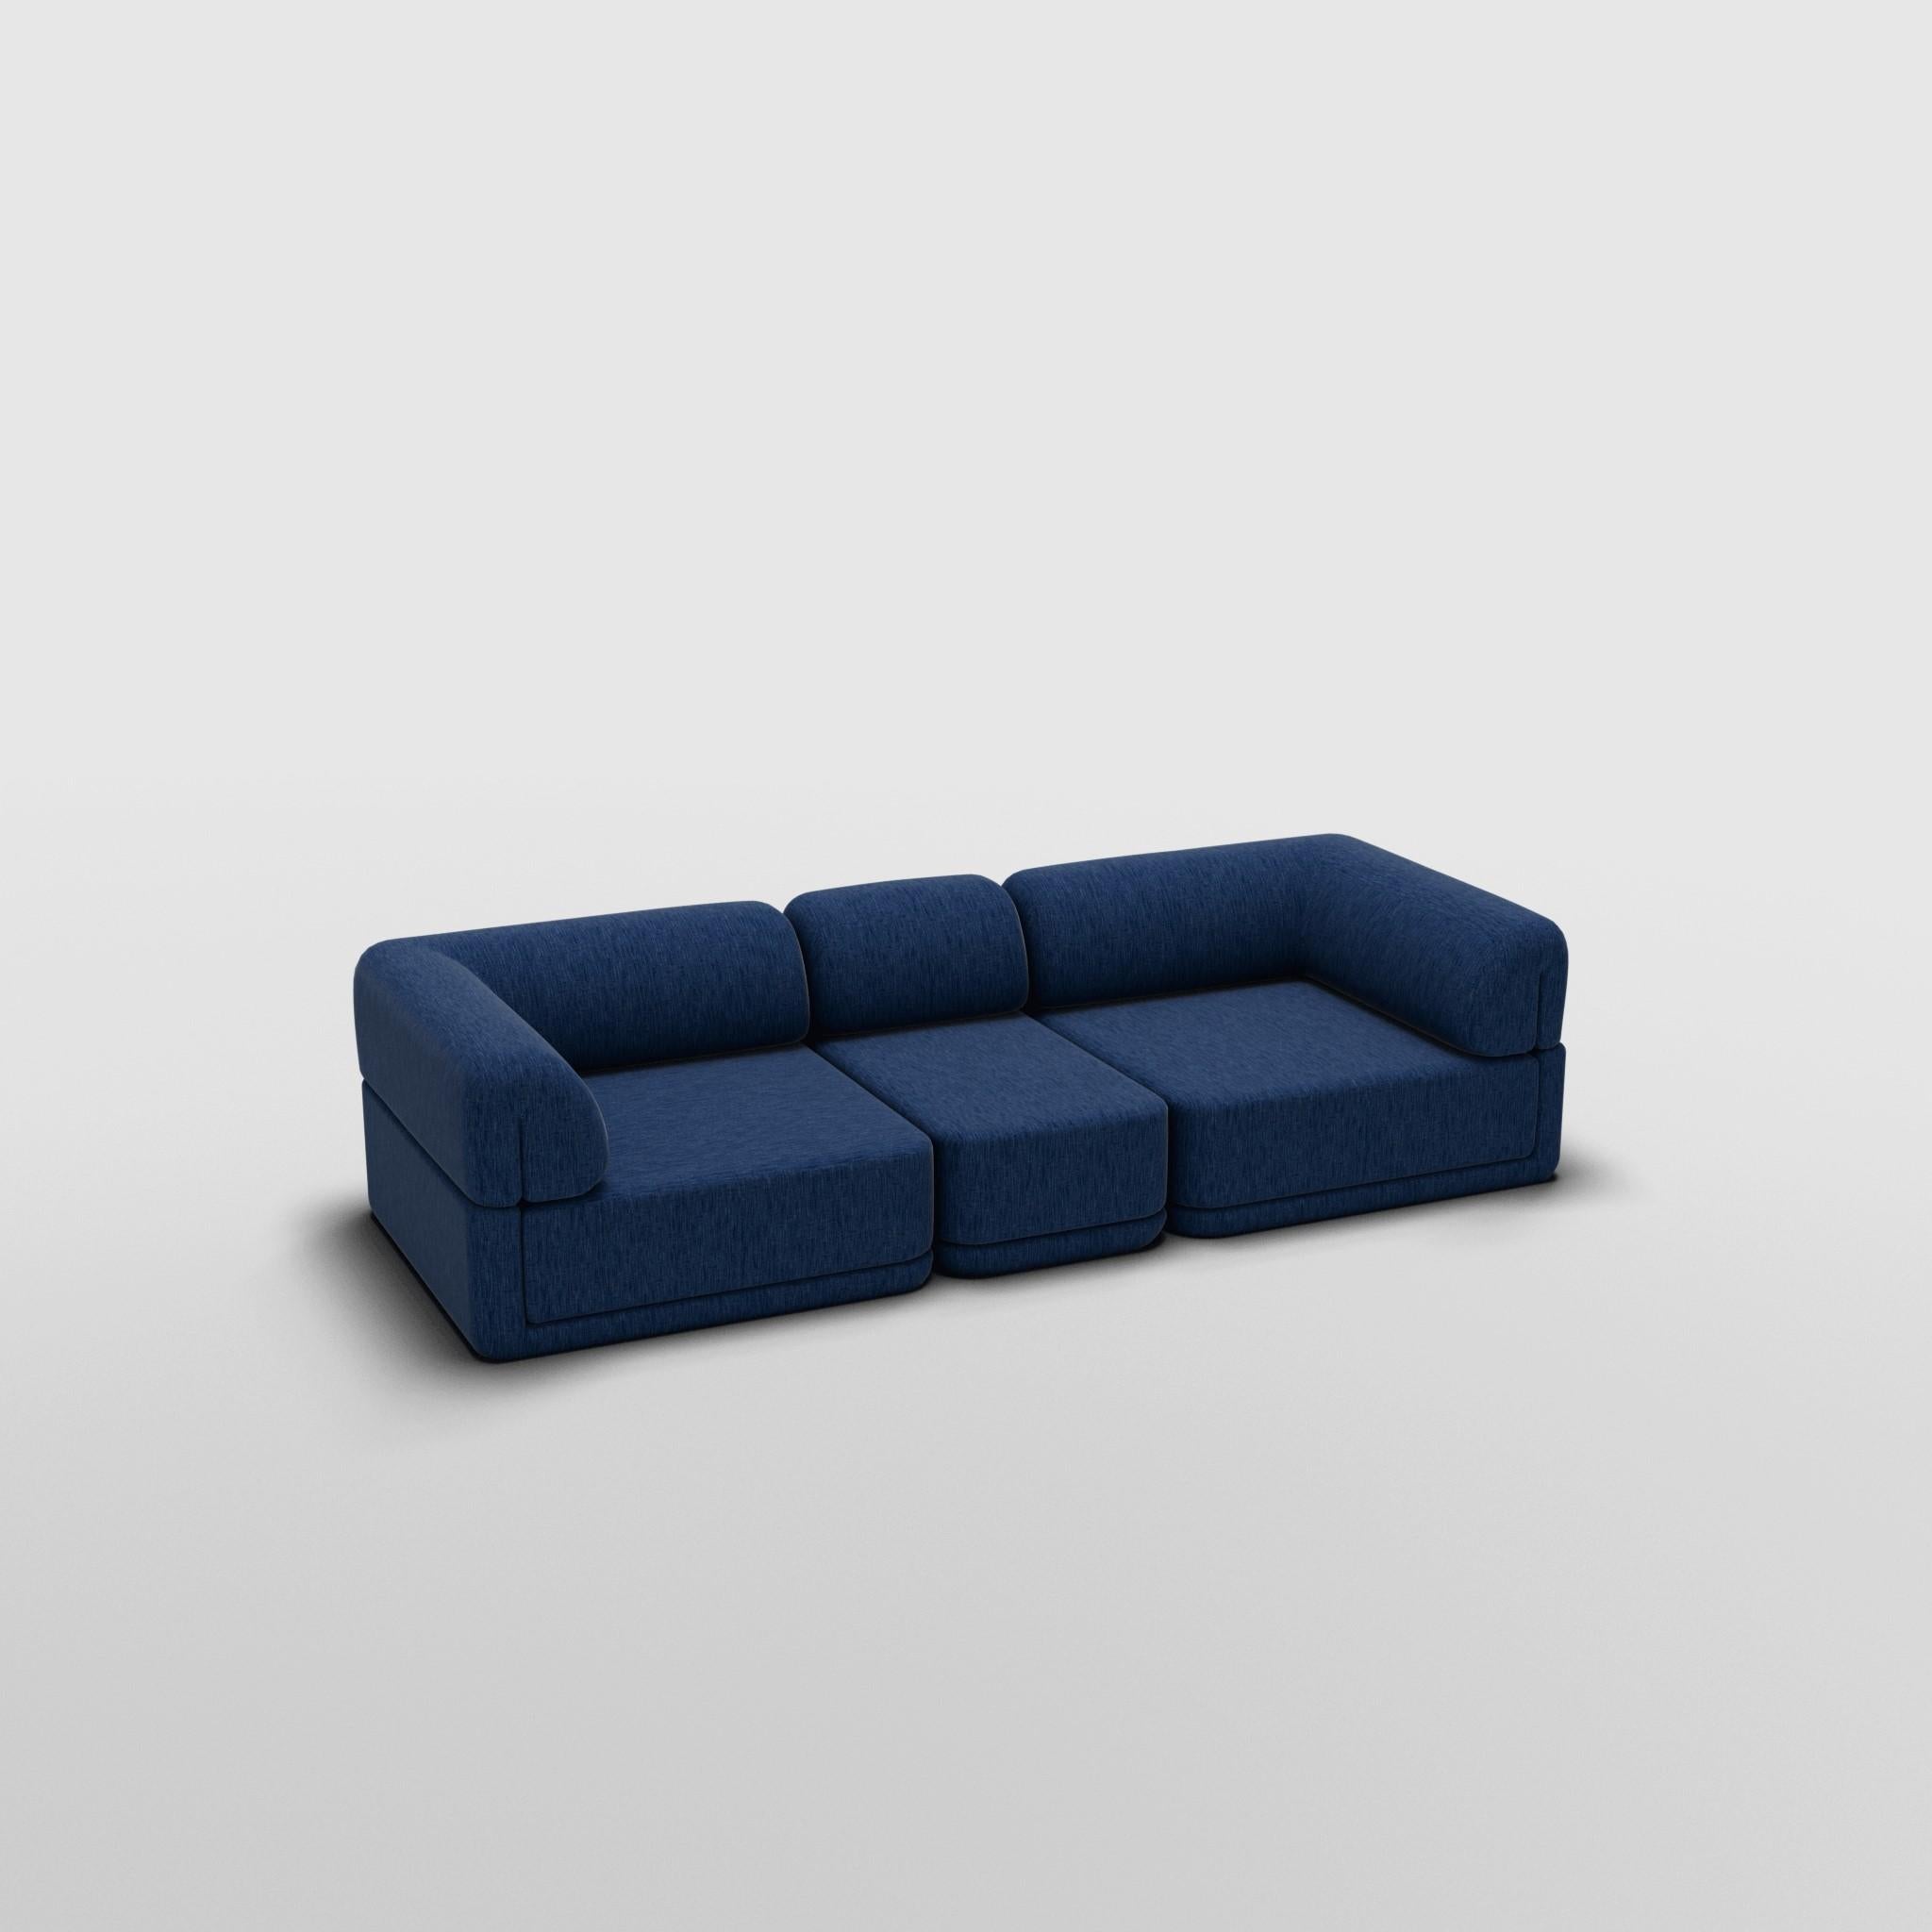 The Cube Sofa - Sofa Slim Set In New Condition For Sale In Ontario, CA